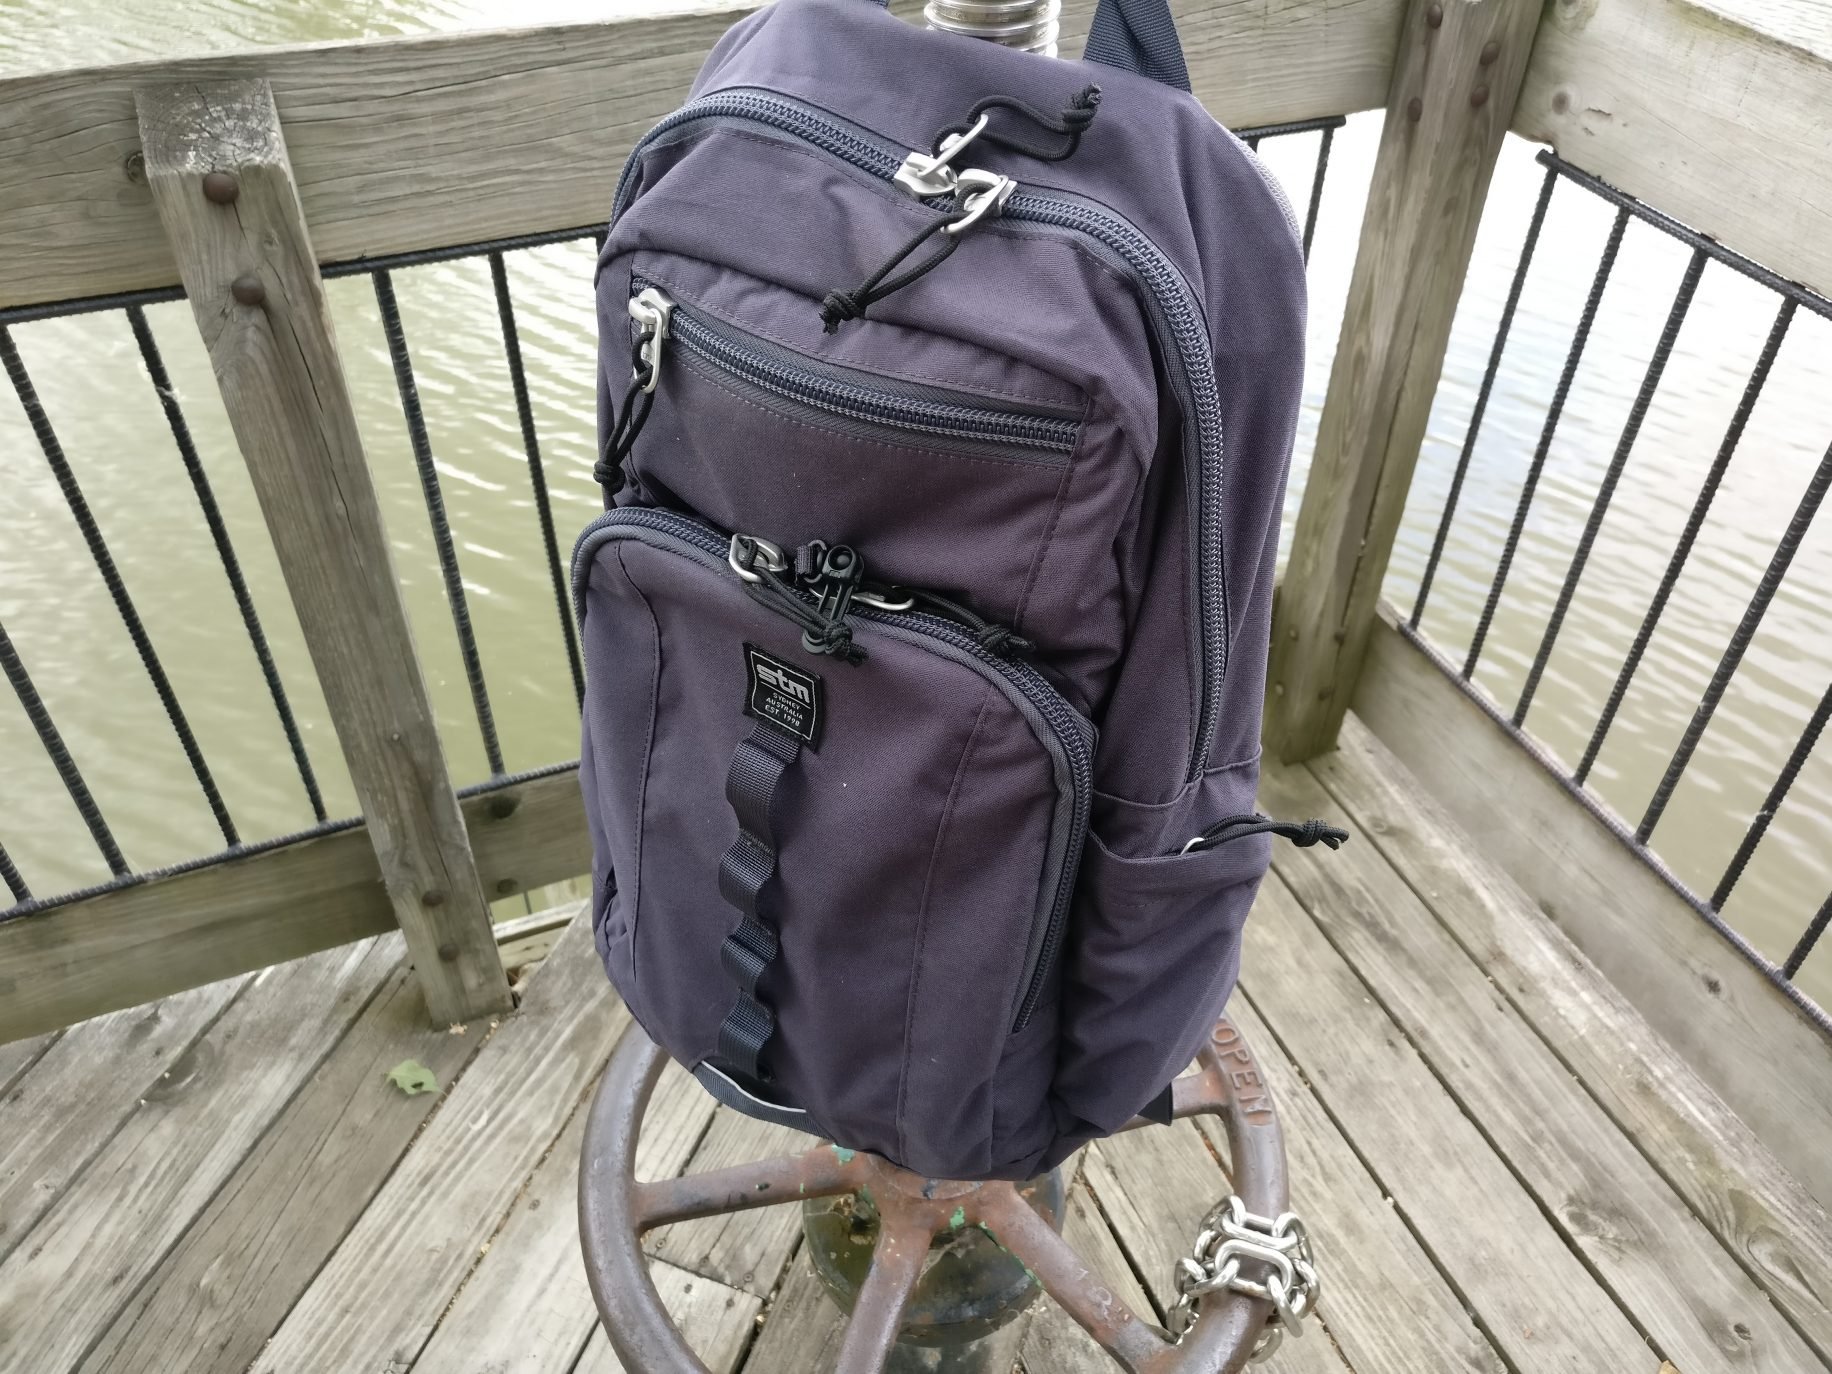 STM Trestle Review: Comfortable Compact Backpack